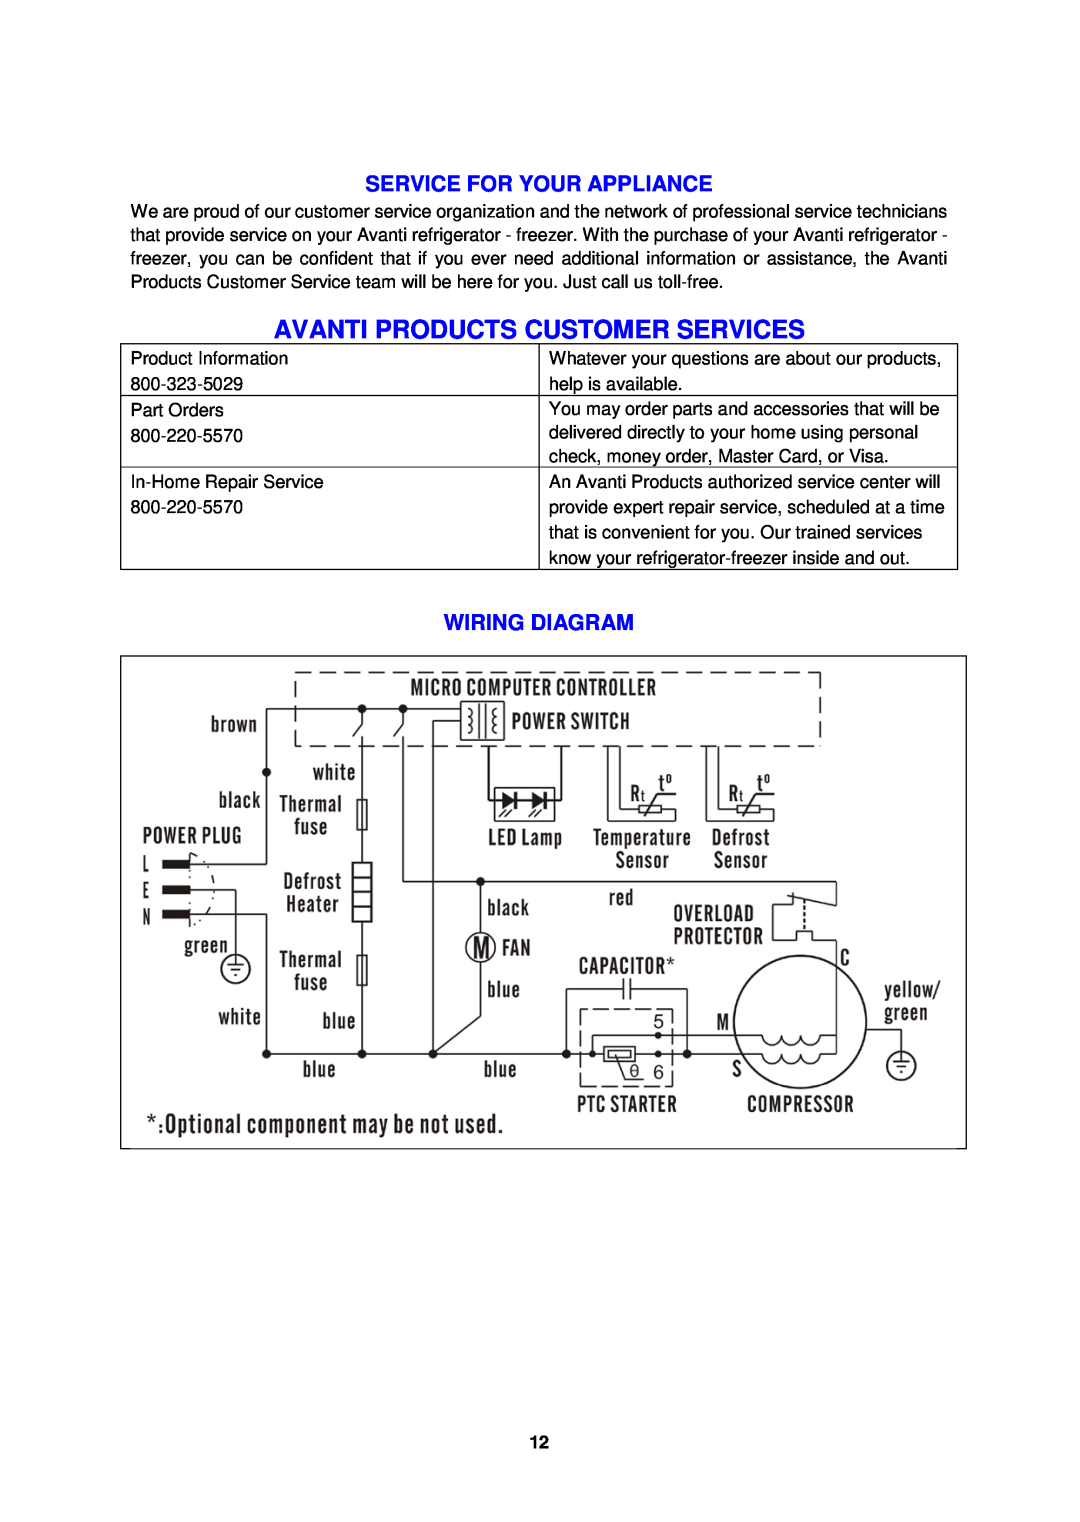 Avanti FF45006W, FF45016PS instruction manual Service For Your Appliance, Wiring Diagram, Avanti Products Customer Services 